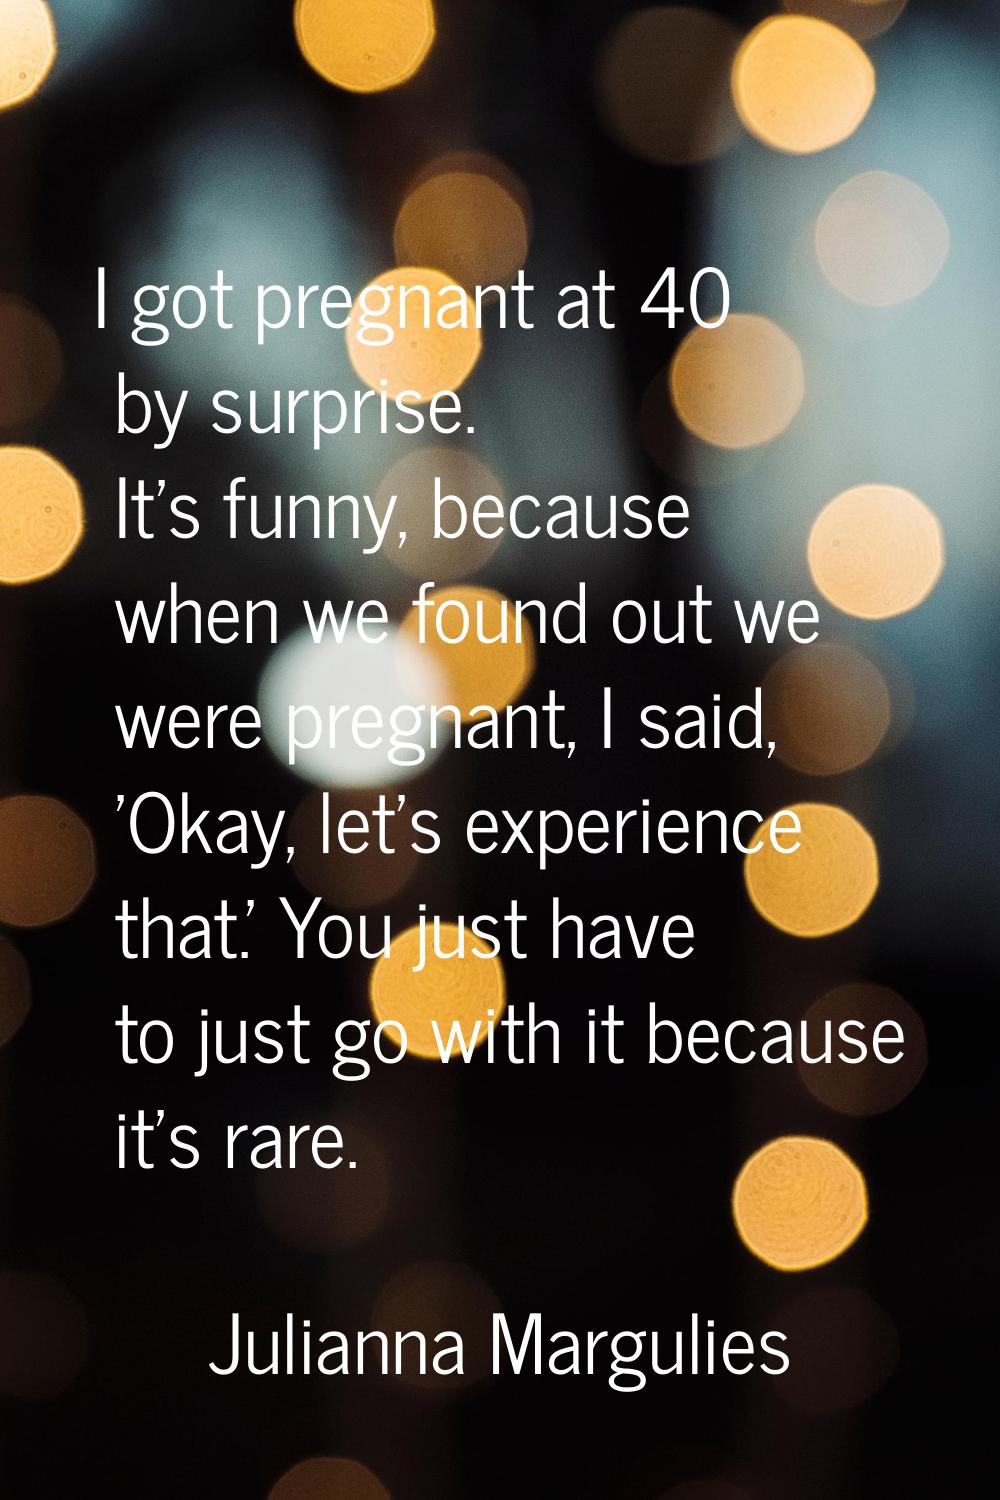 I got pregnant at 40 by surprise. It's funny, because when we found out we were pregnant, I said, '